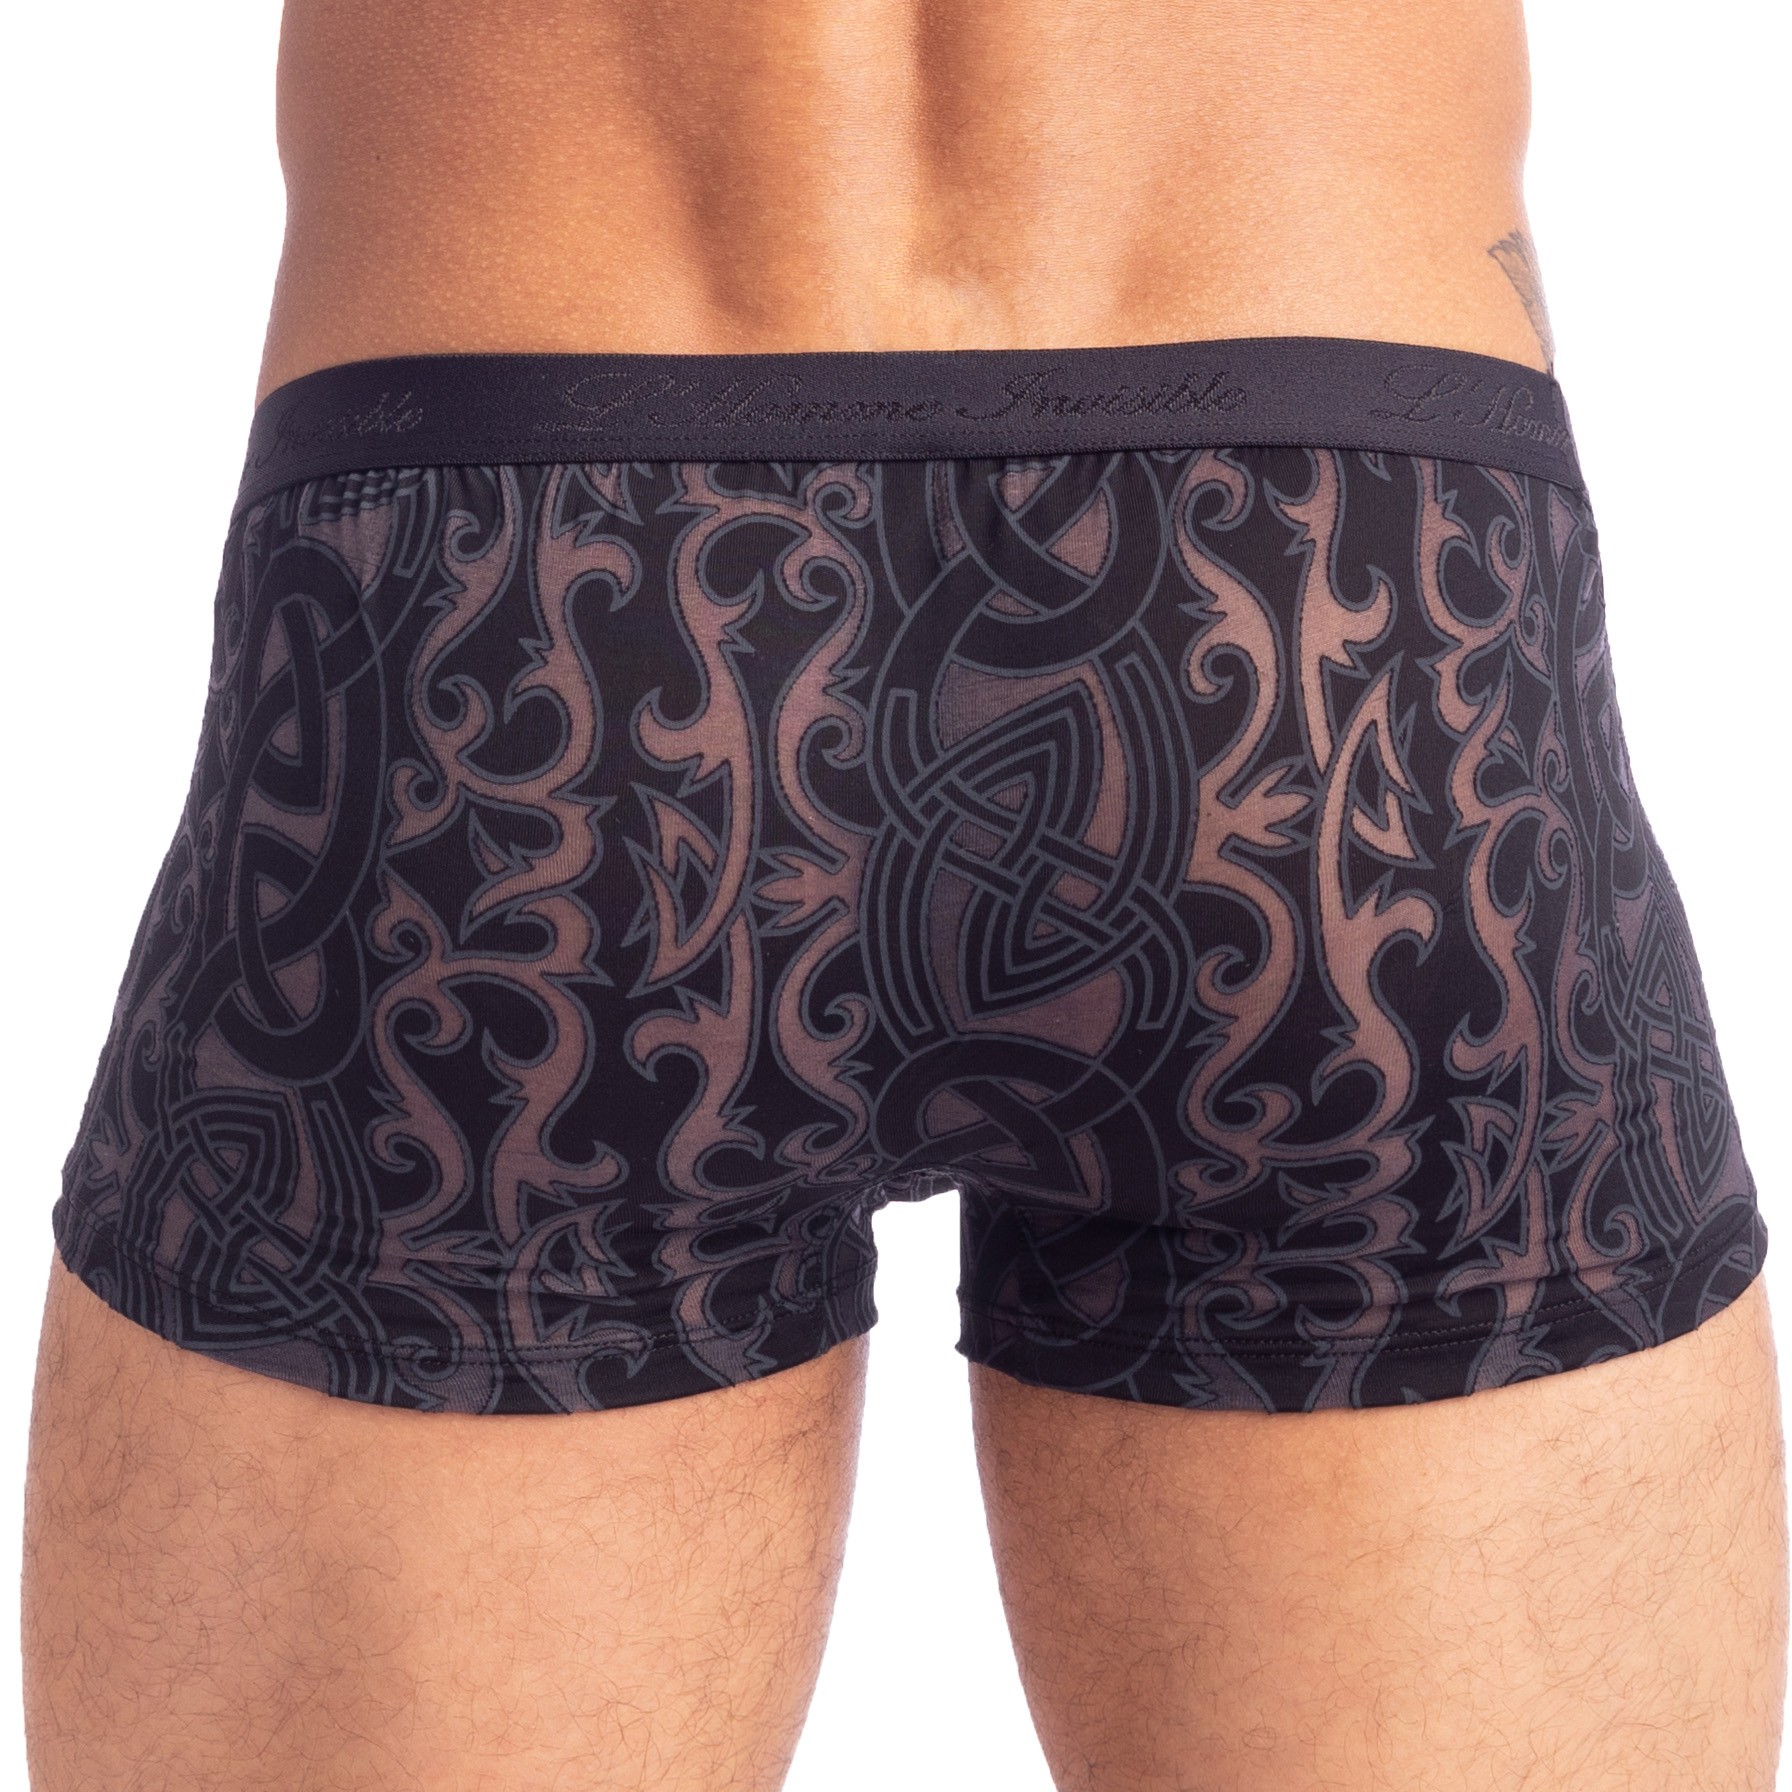 Dévoré Tattoo - Hipster Push-Up: Boxers for man brand L'Homme Invis